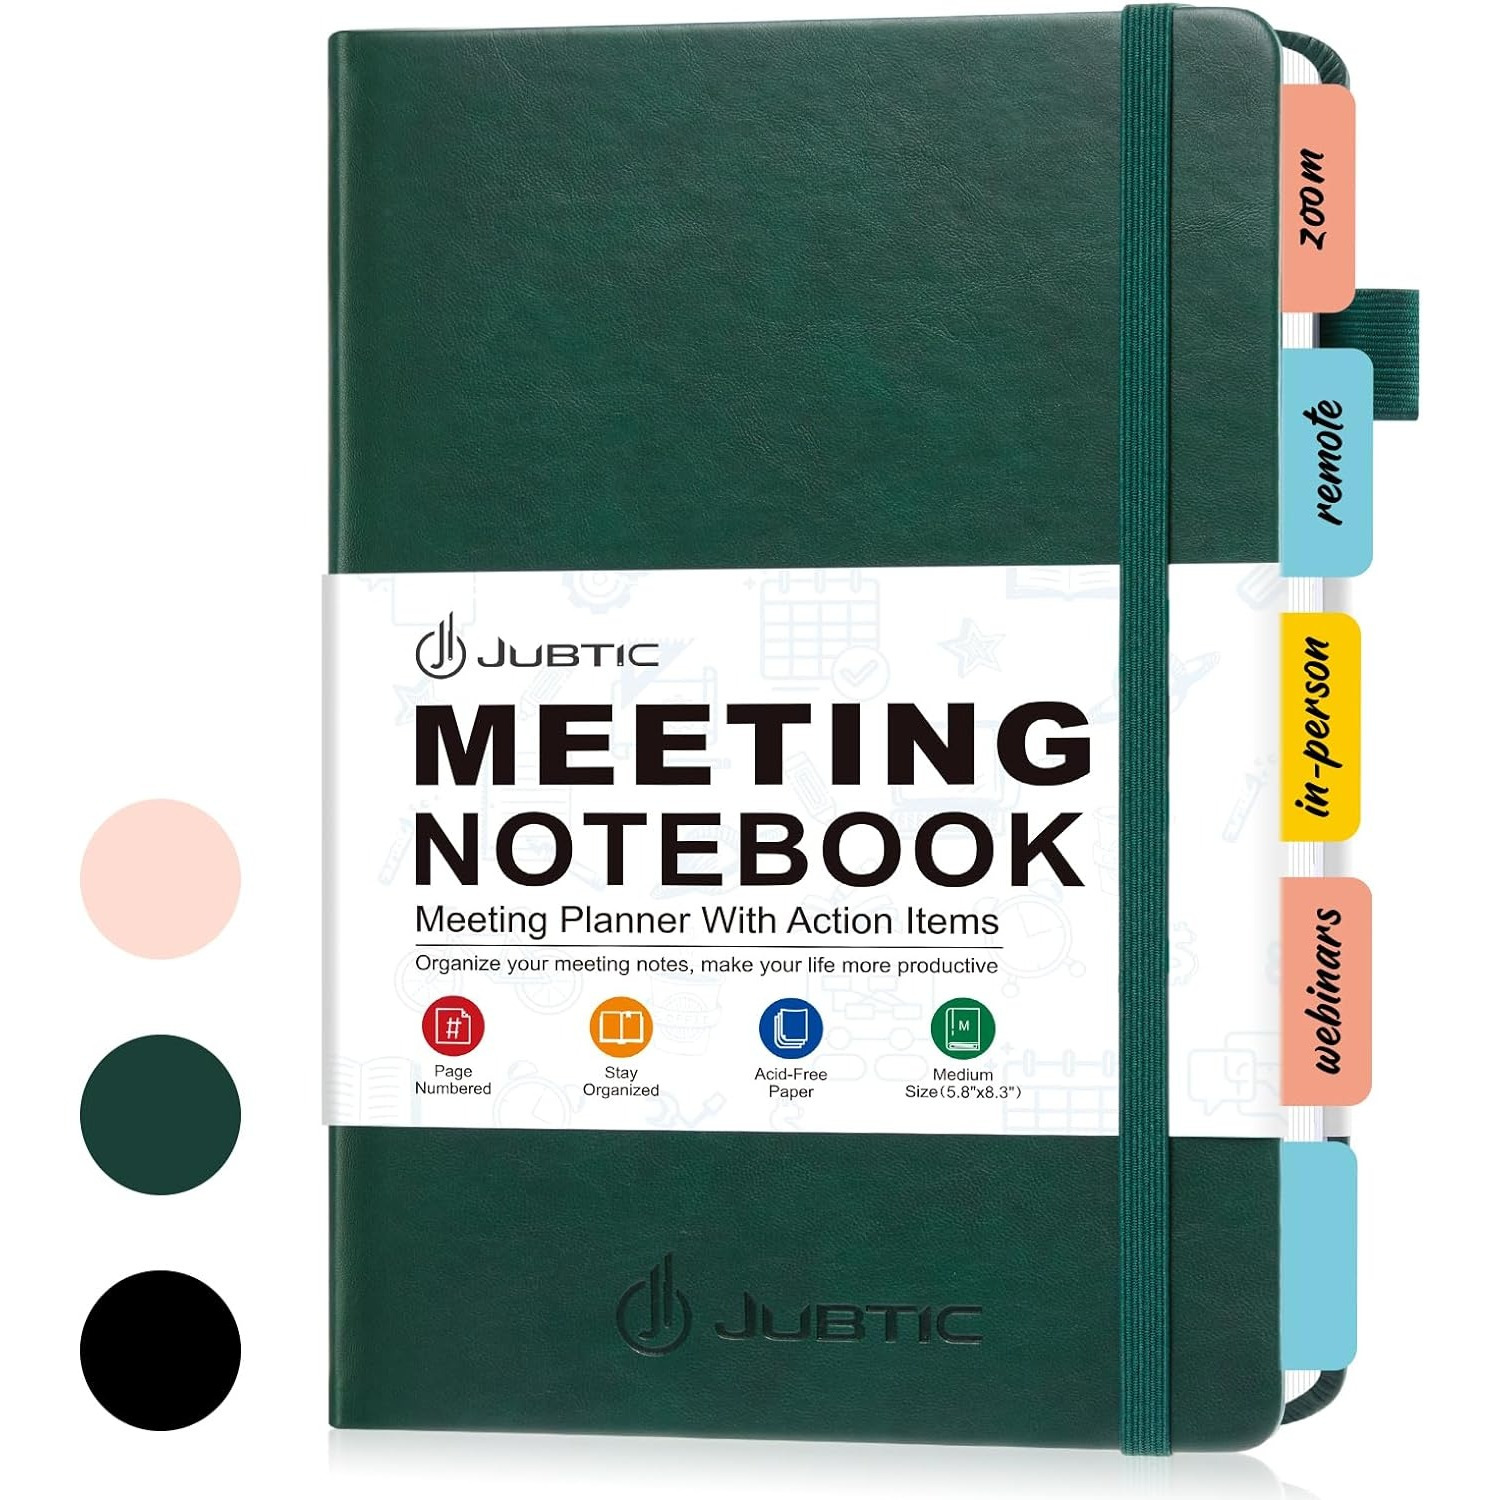 

Jubtic A5 Leather-bound Meeting Notebook - Action Item & Project Planner For Office, Business Agenda Organizer, Durable Daily Work Supplies For Men & Women